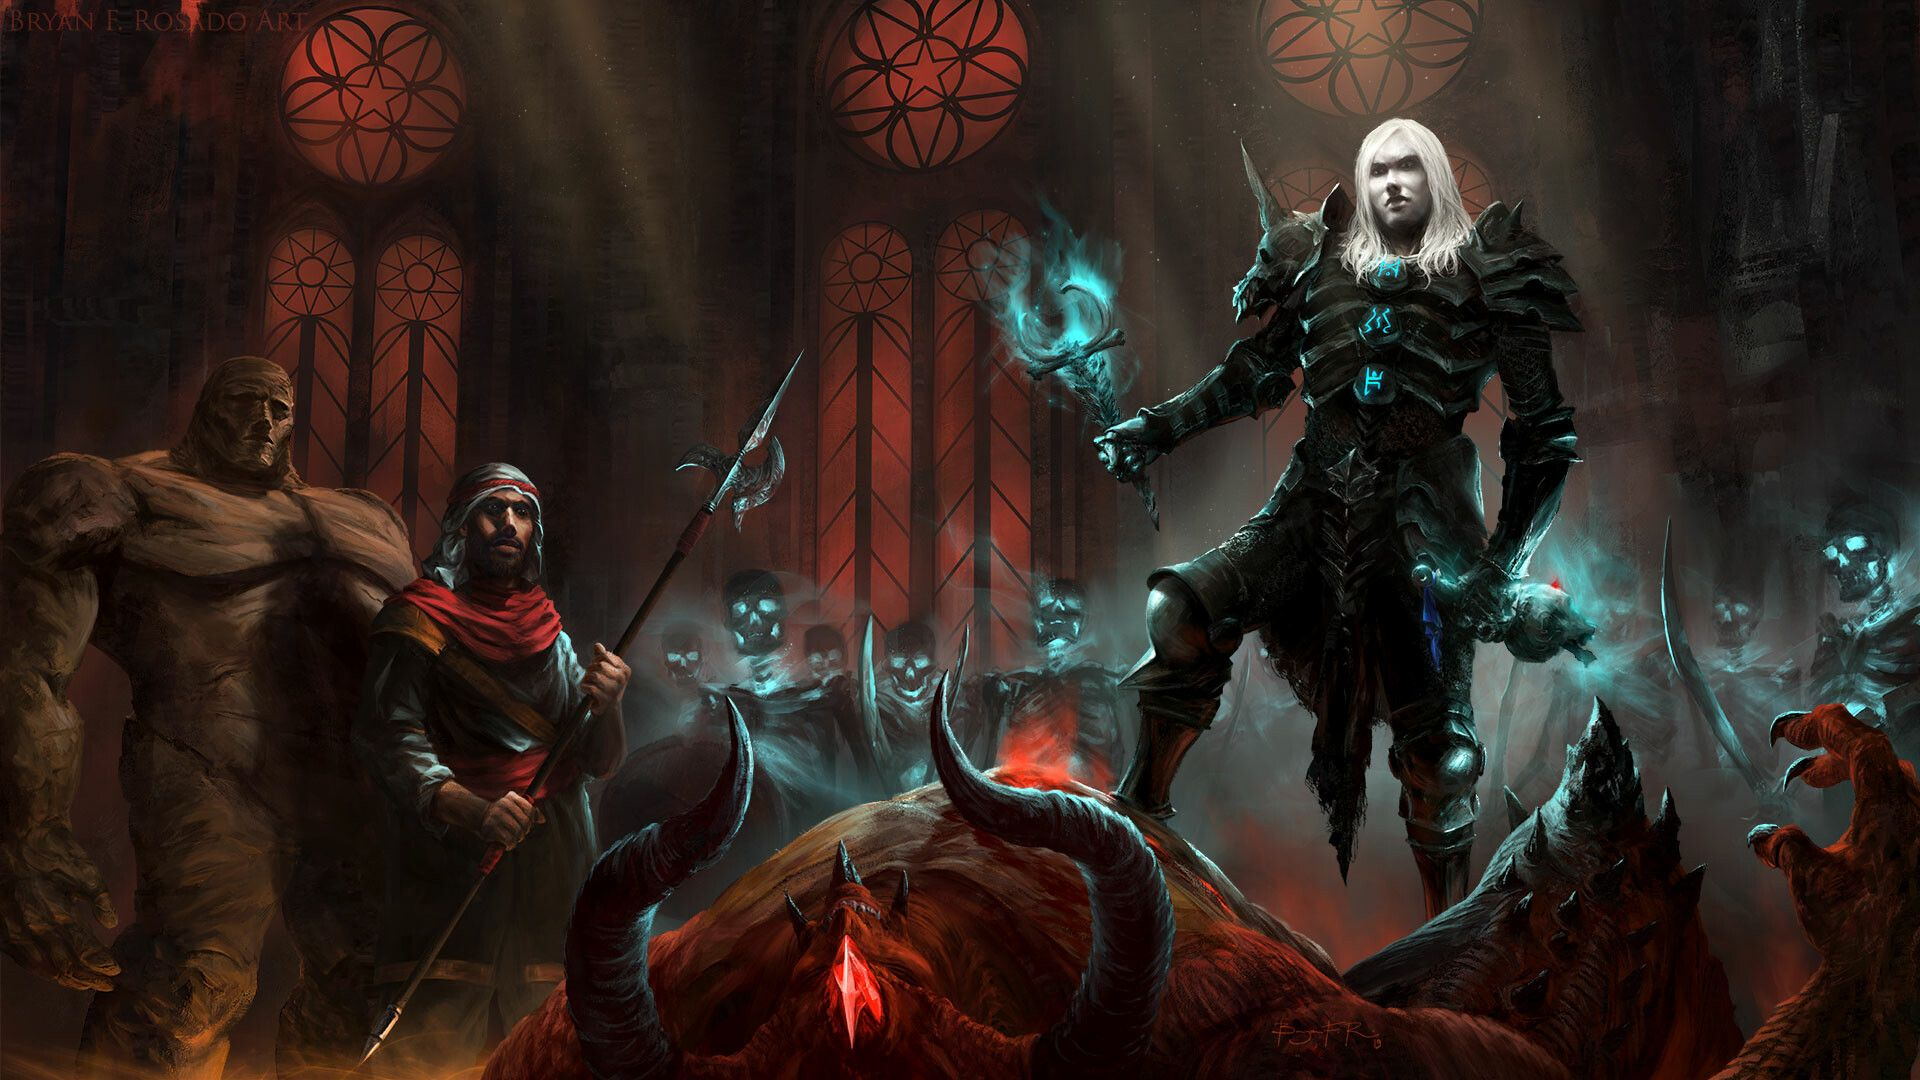 1920x1080 Awesome Diablo 2 Necromancer Fan Art And View | Necromancer, Fan art, Art